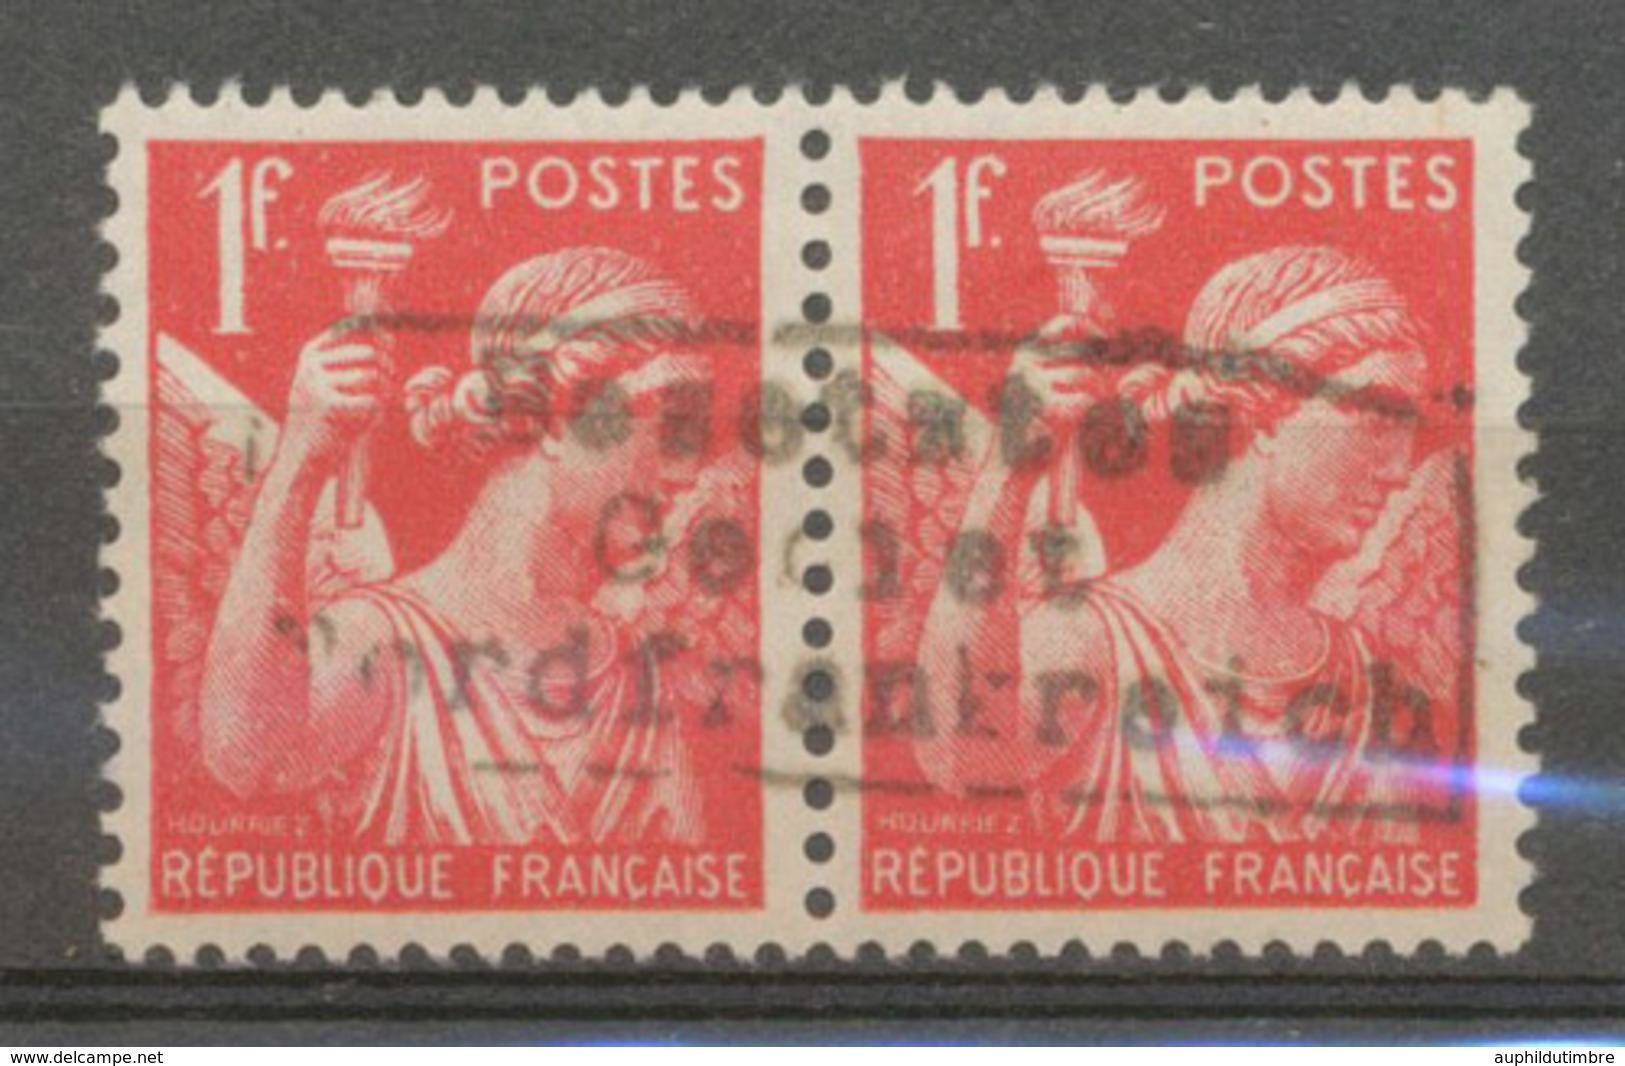 Guerre Paire DUNKERQUE Sur 1 F. Iris Rouge, Superbe, Neuf *. X4551 - War Stamps